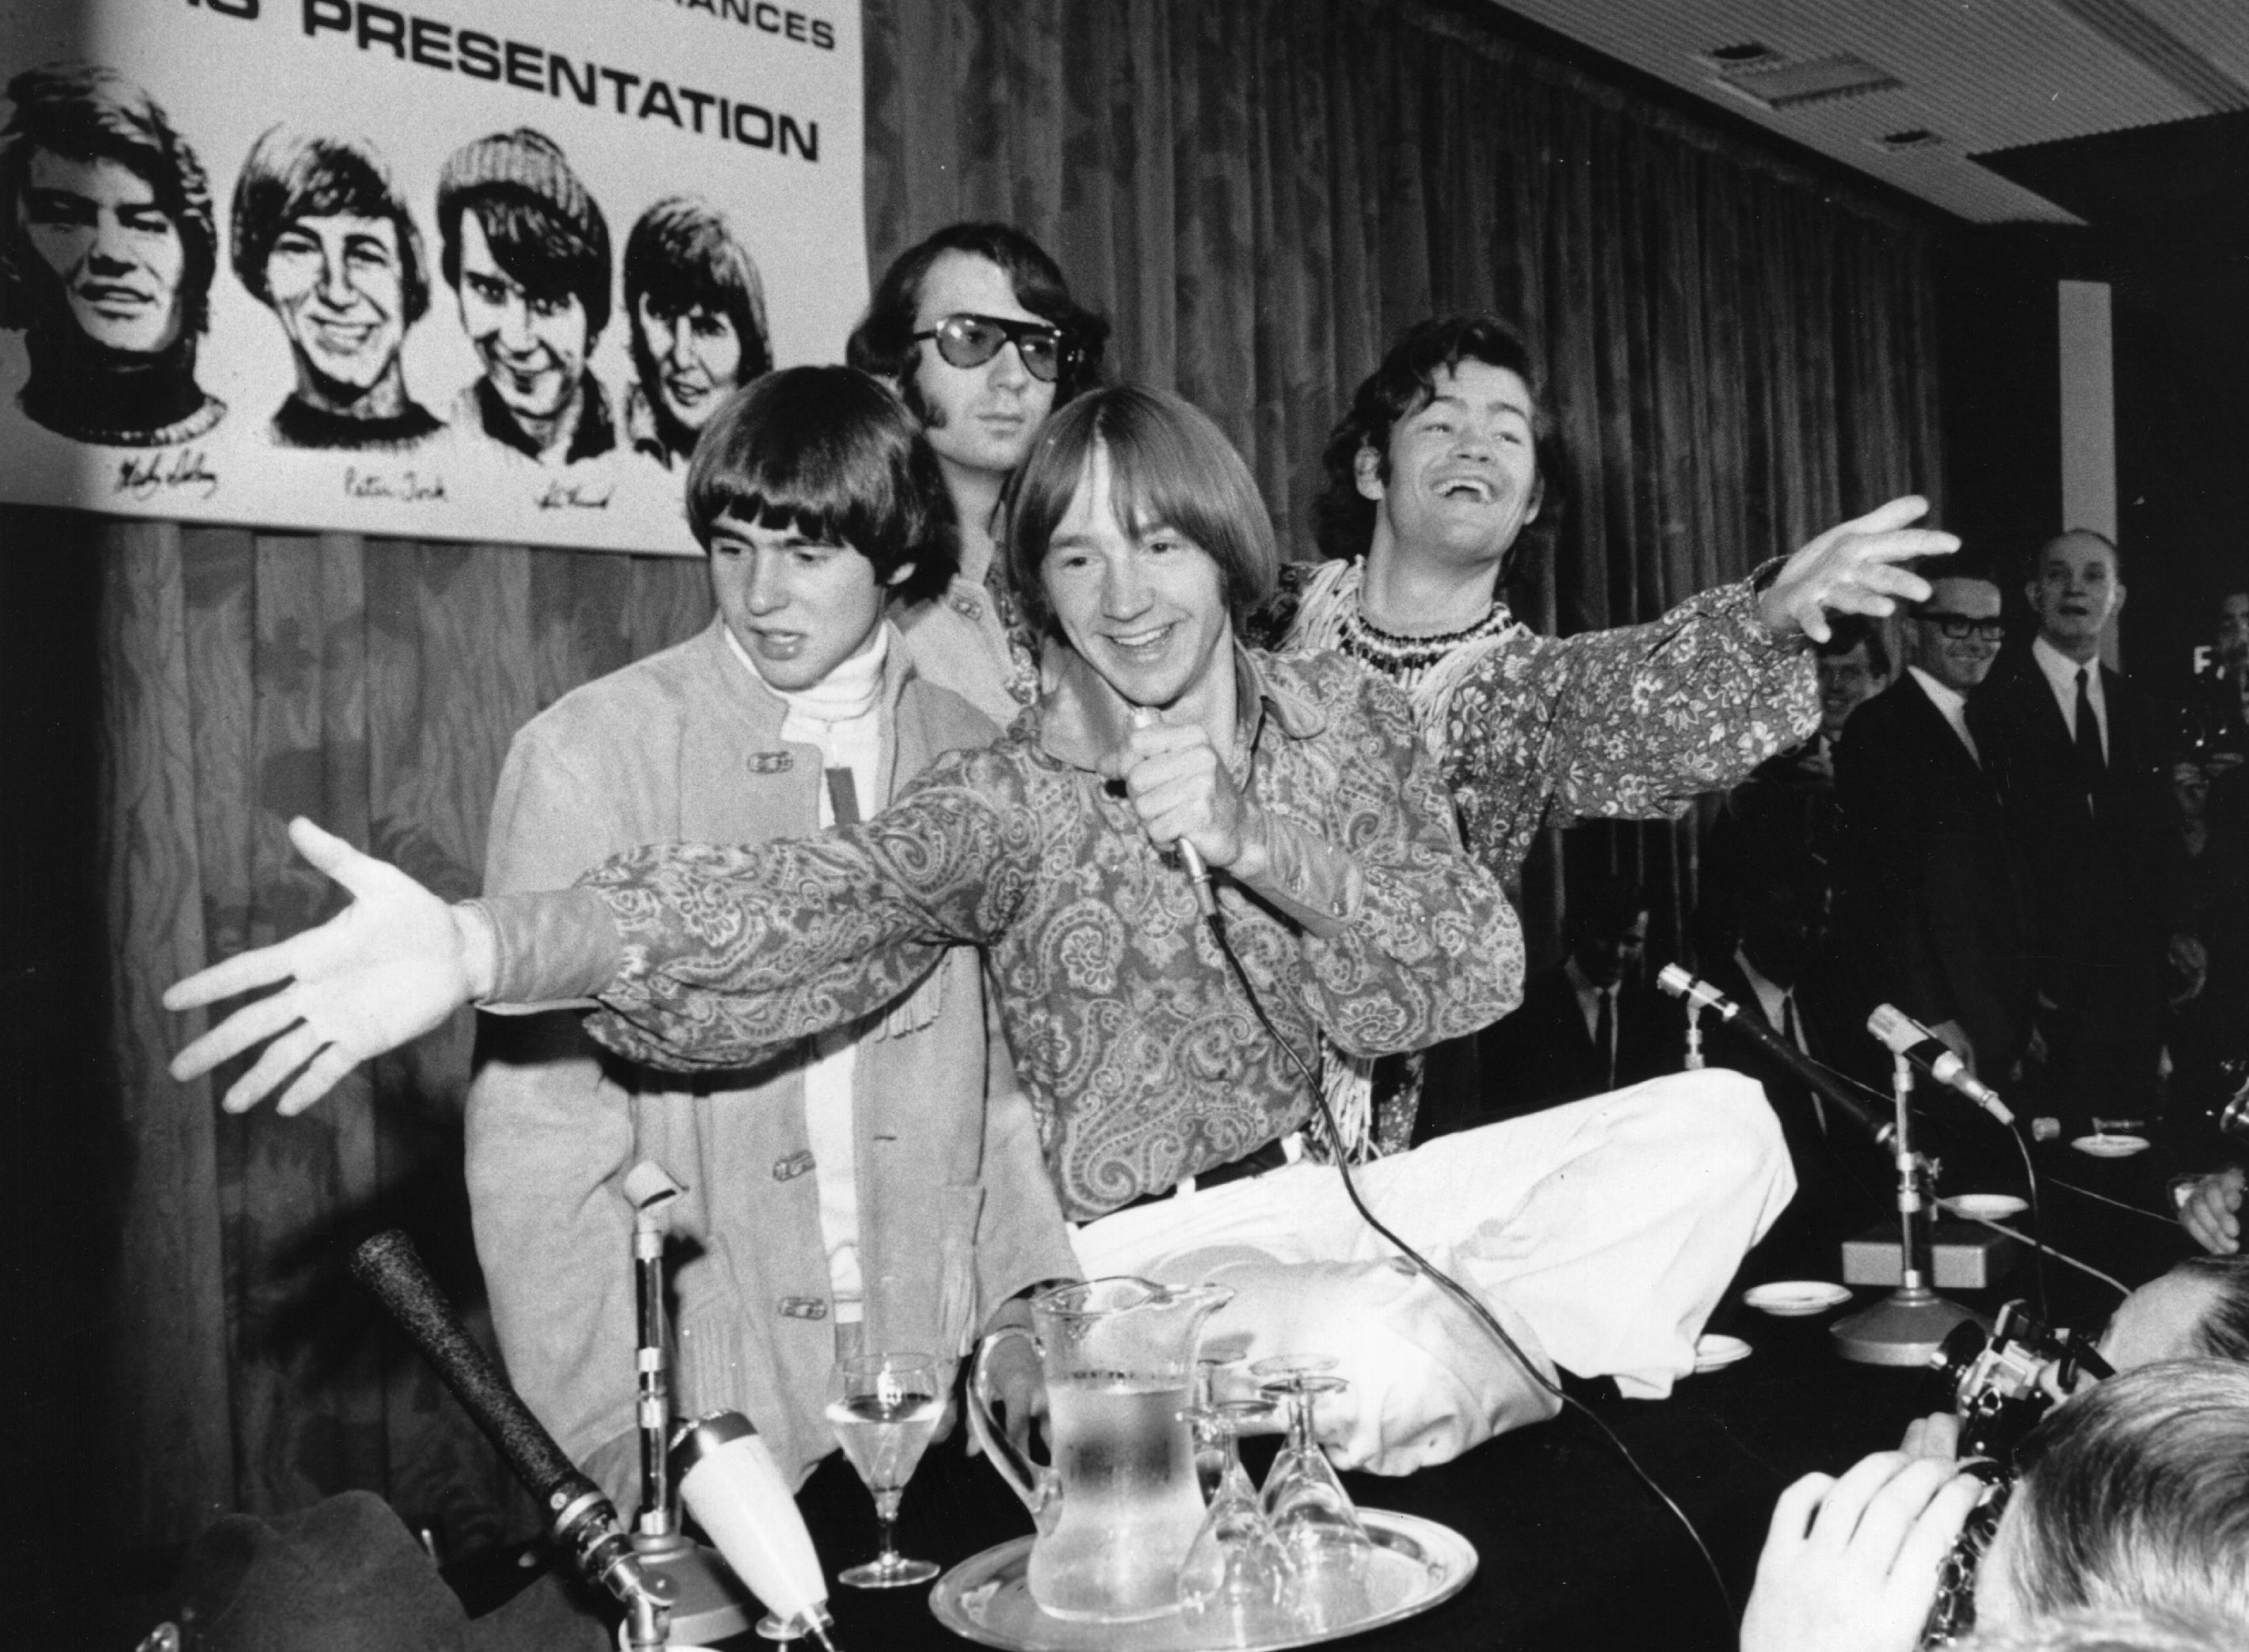 The Monkees standing behind a table with a pitcher on it